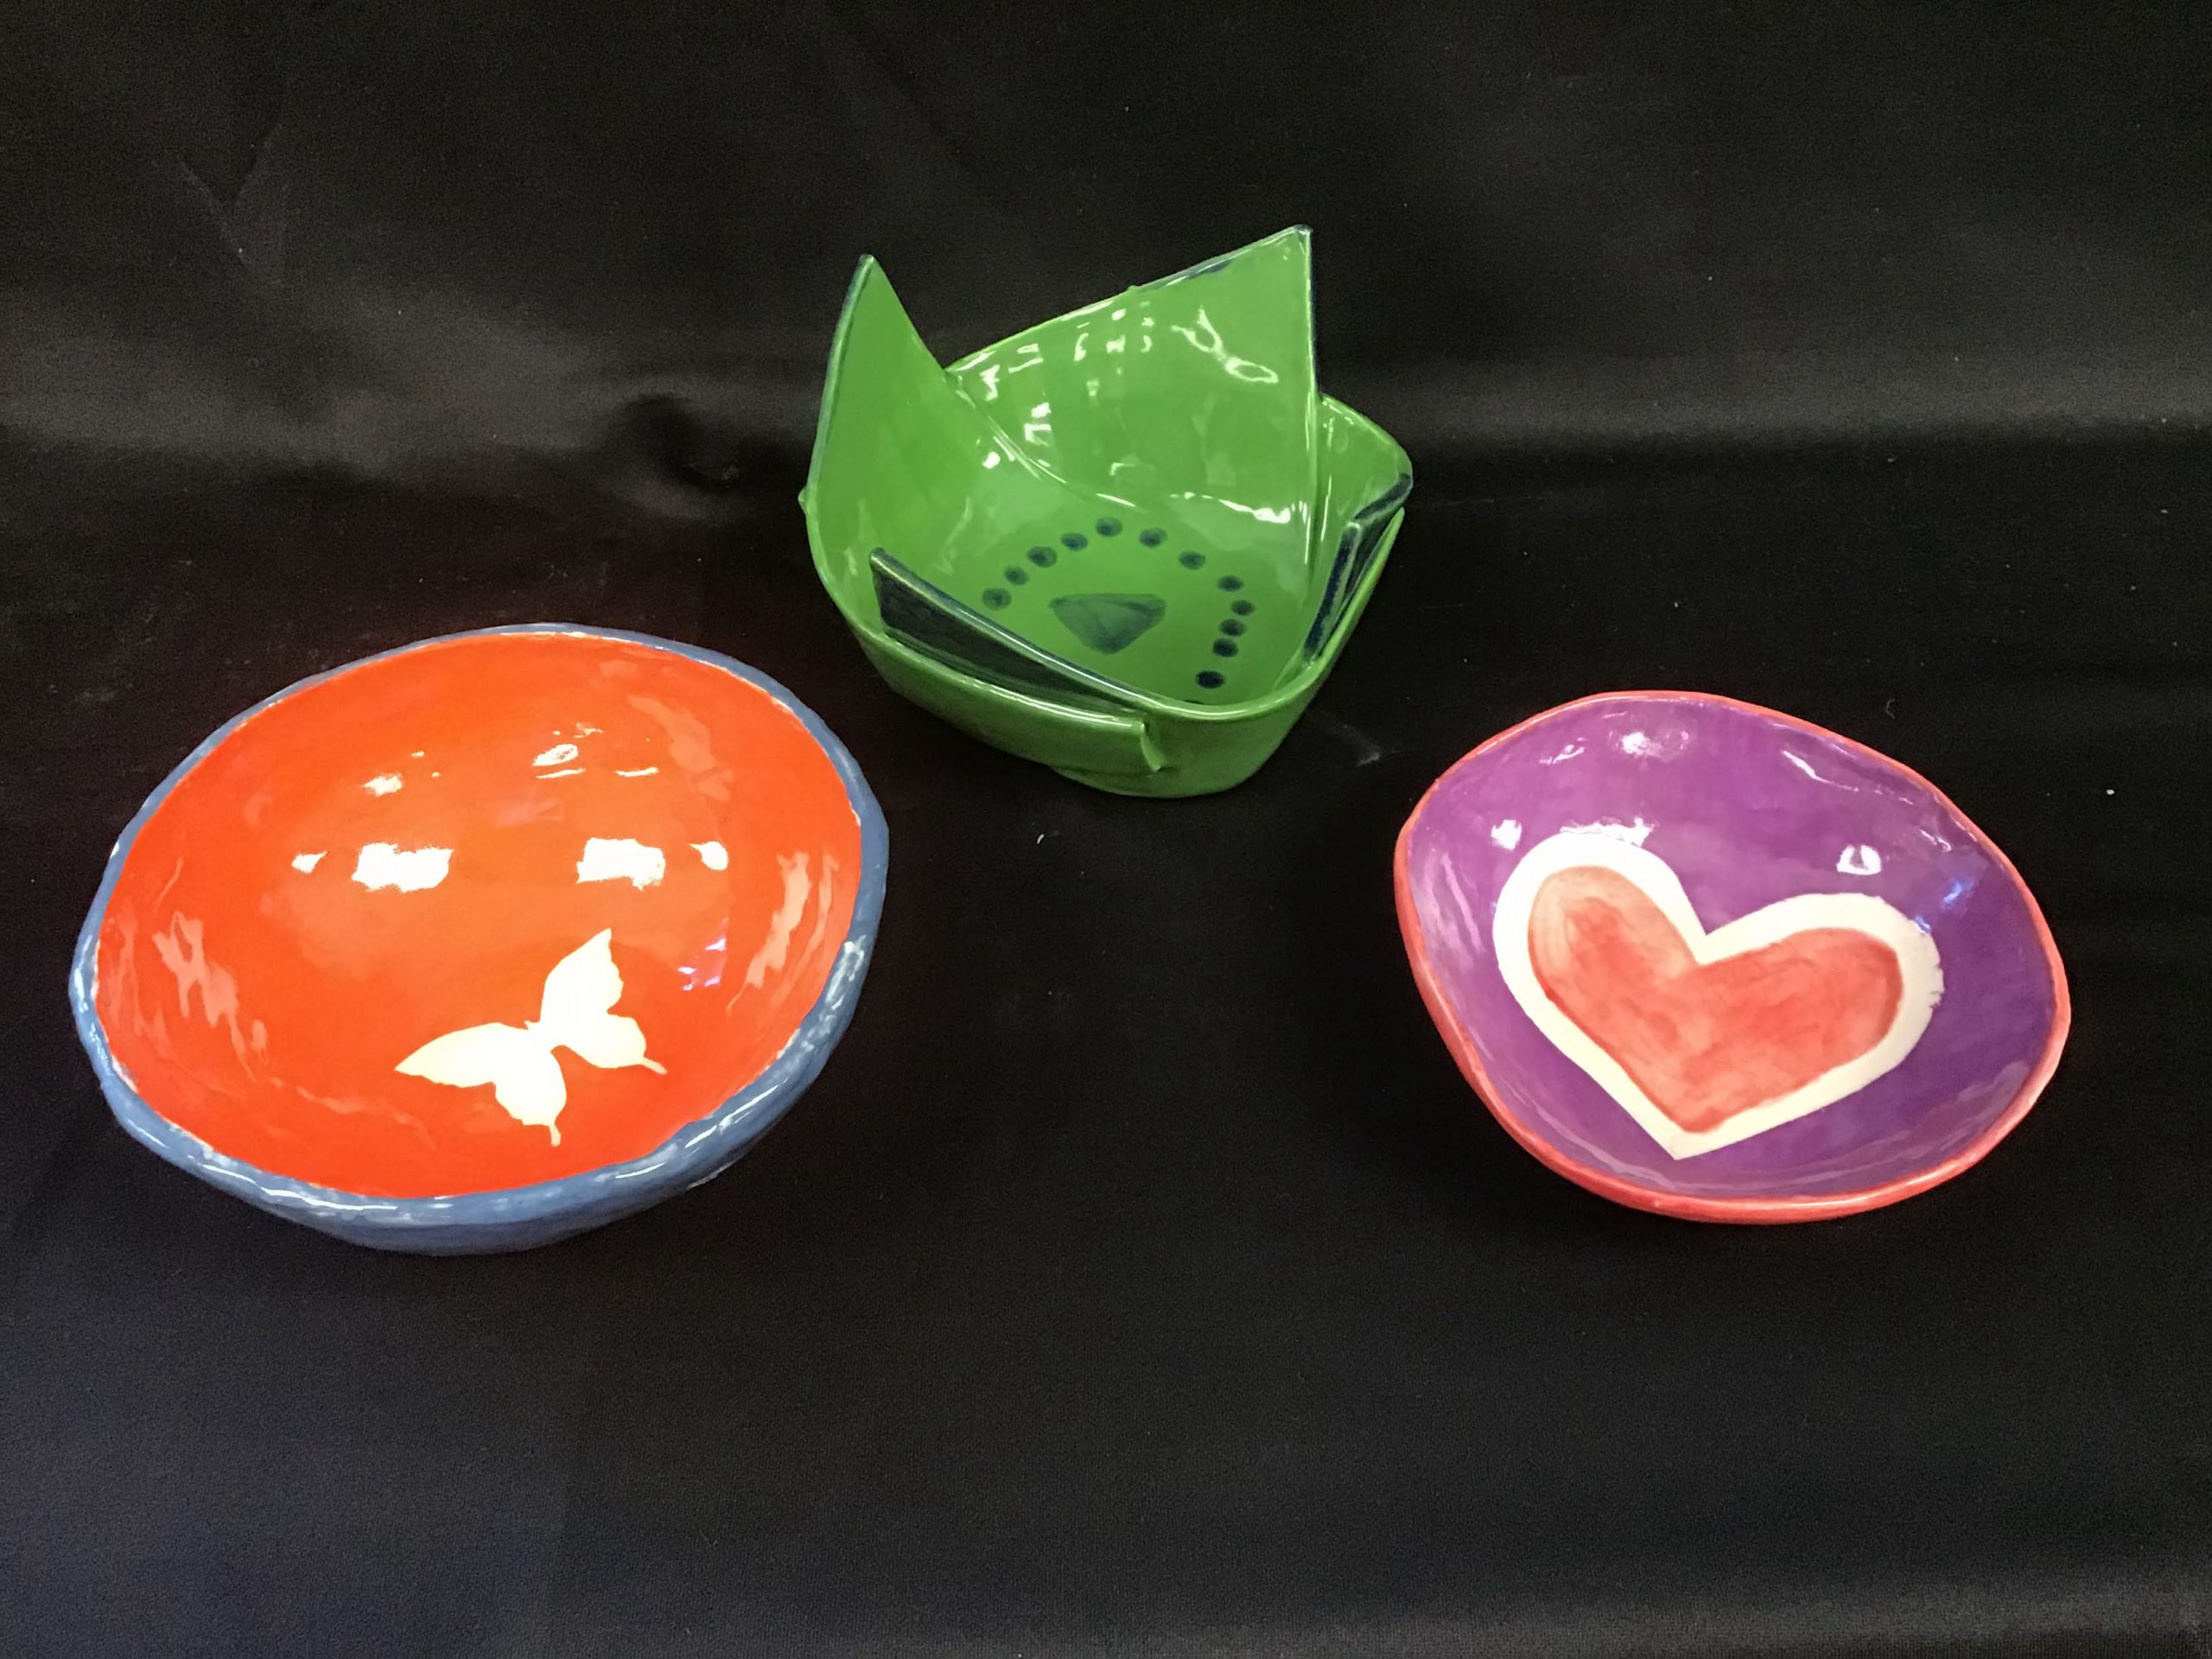 You are currently viewing Empty Bowls Old Rochester Regional High School